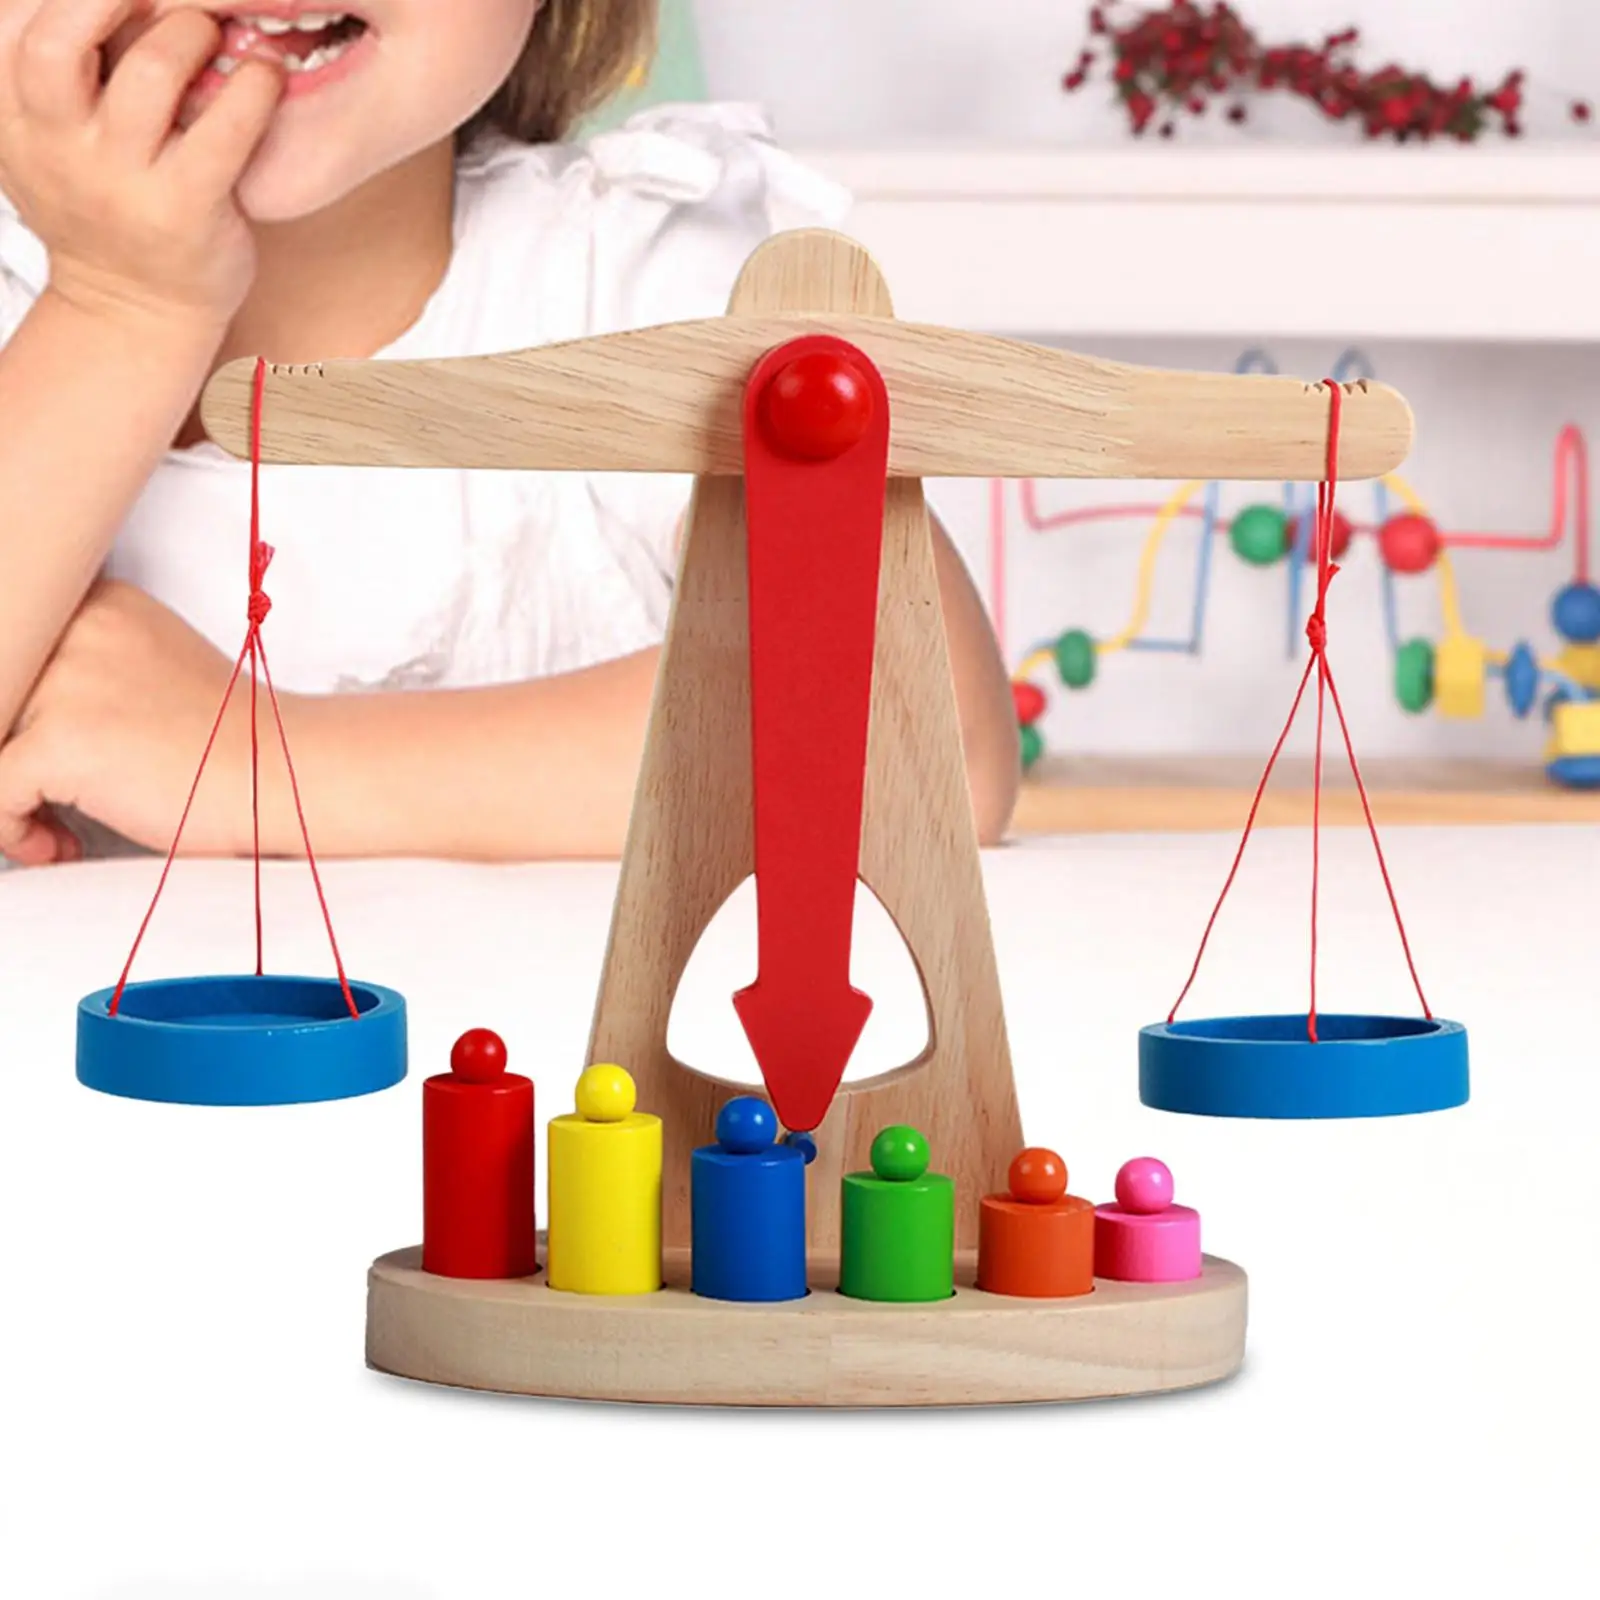 Balance Counting Toys Early Educational Counting Number Toy Balance Math Scale for 3 Years Old up Preschool Toddler Children